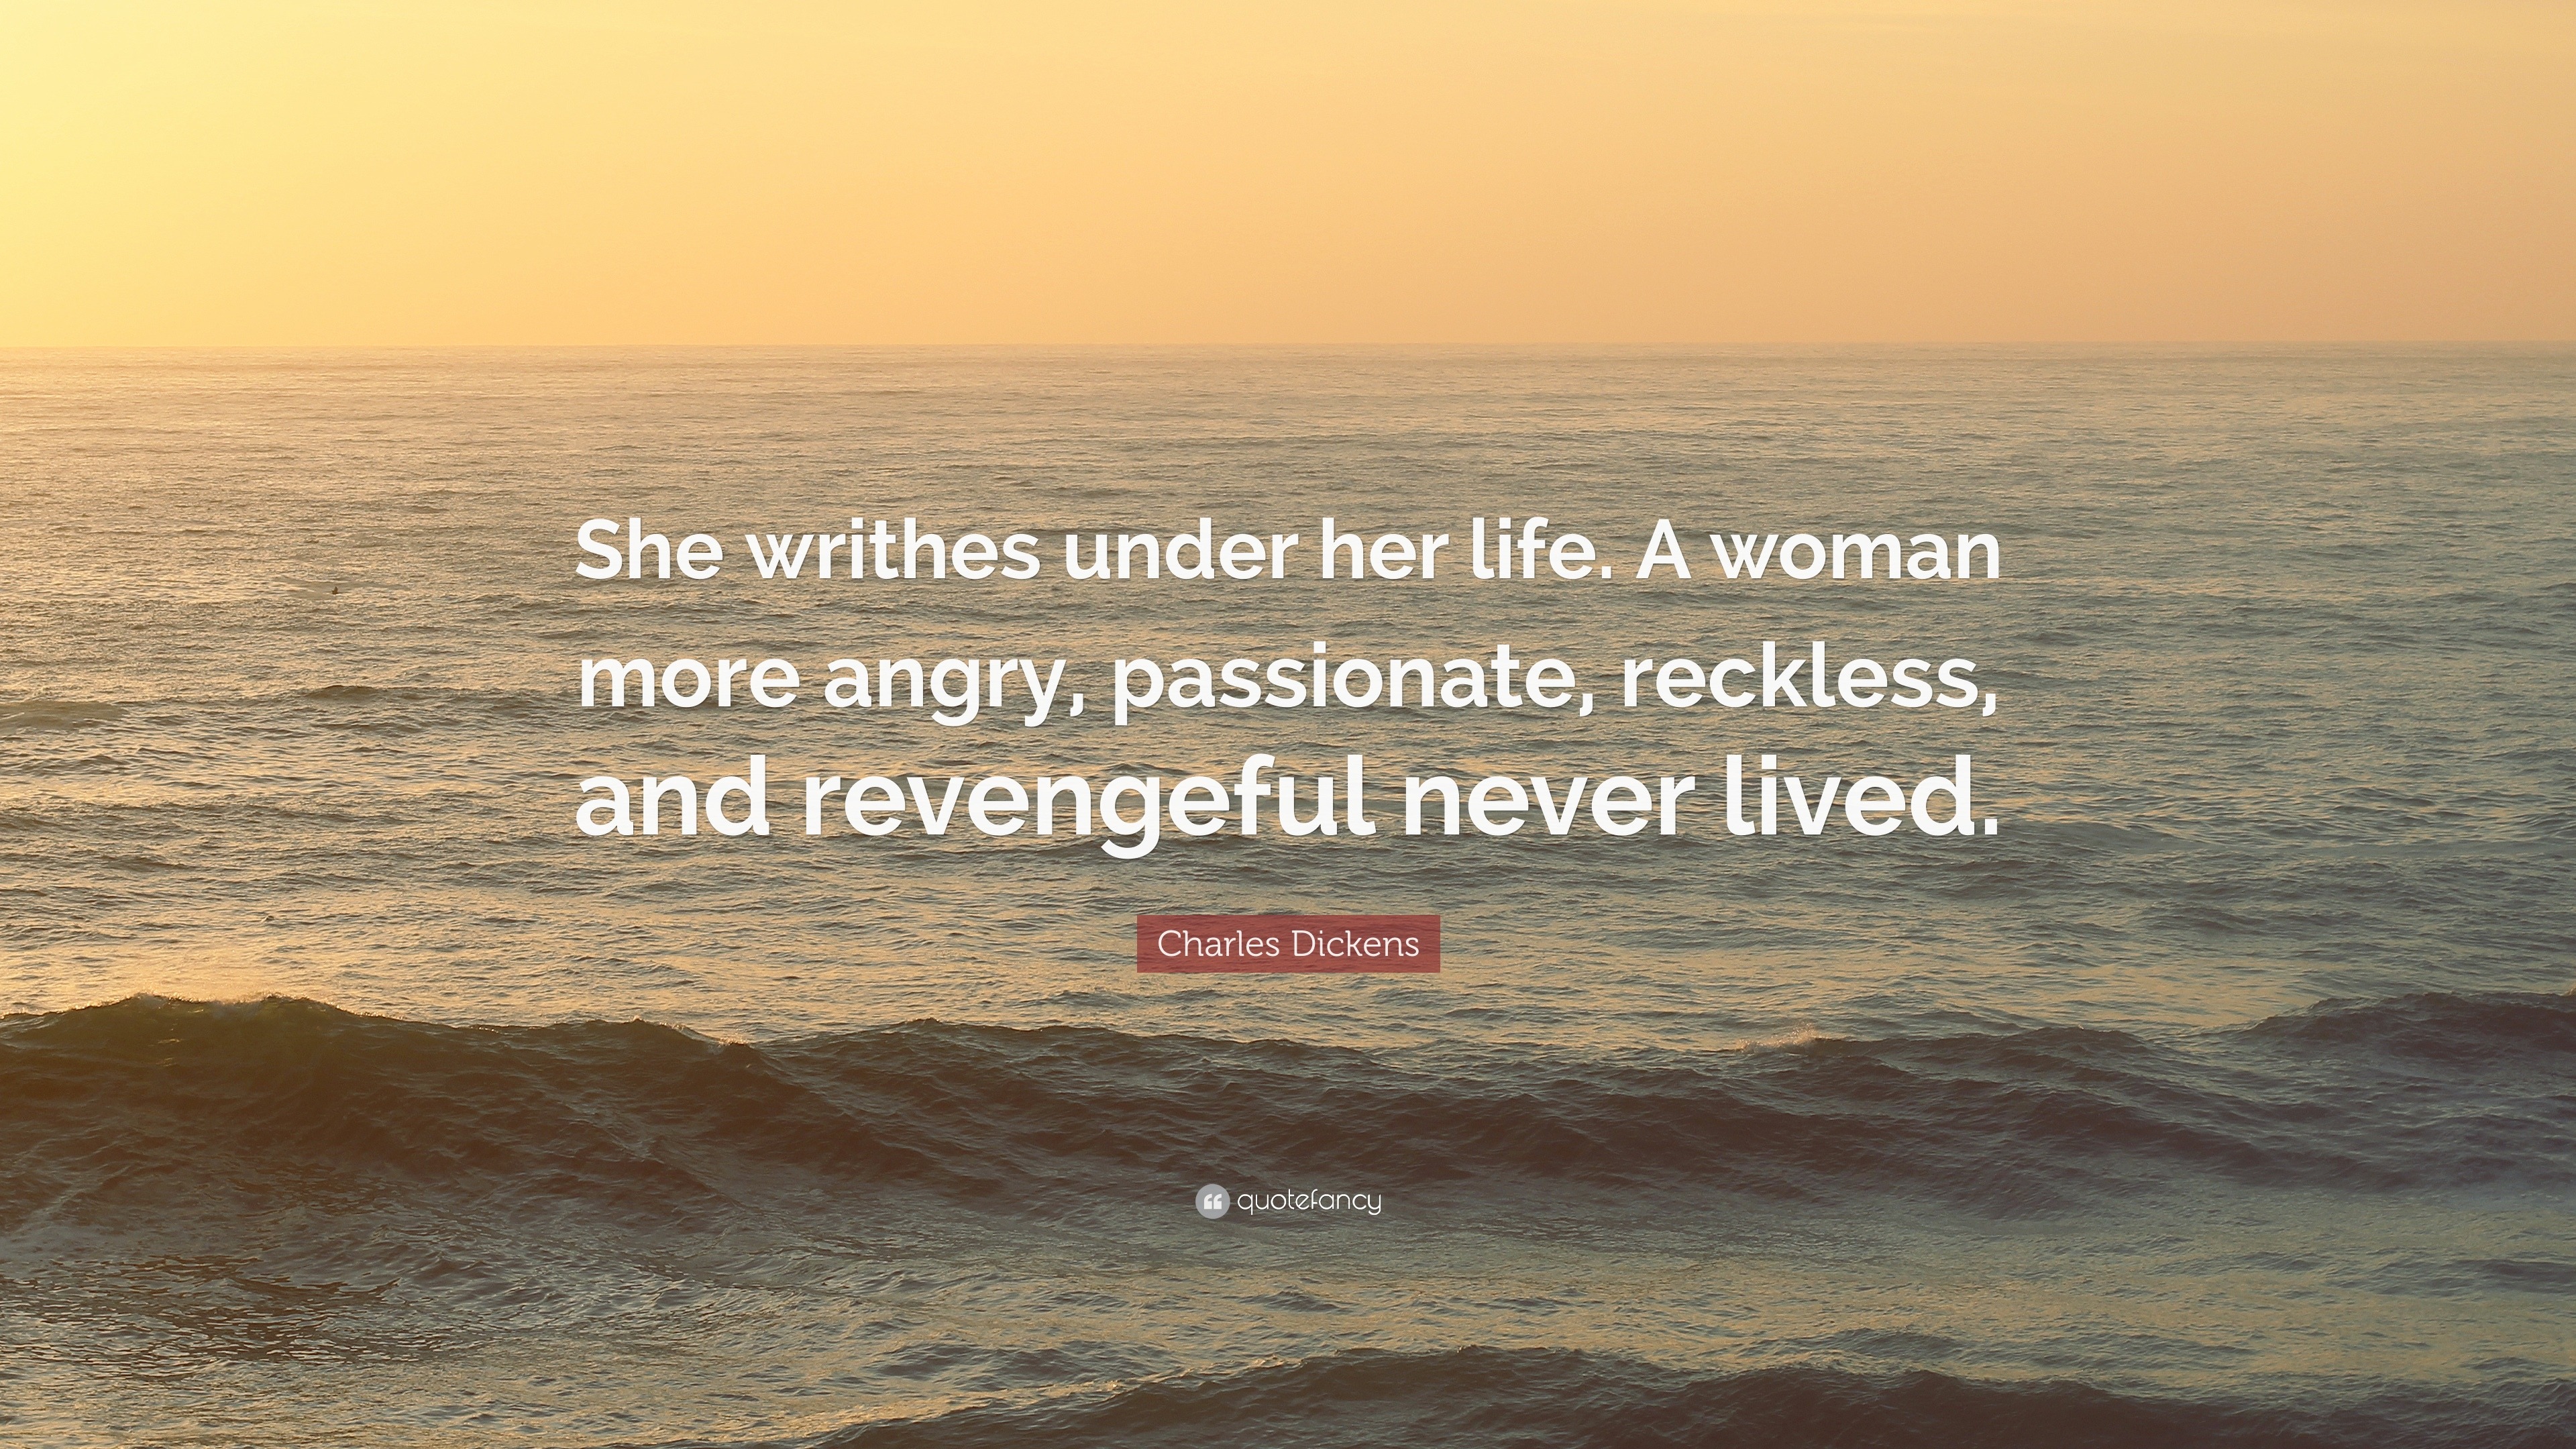 Charles Dickens Quote: “She writhes under her life. A woman more angry ...